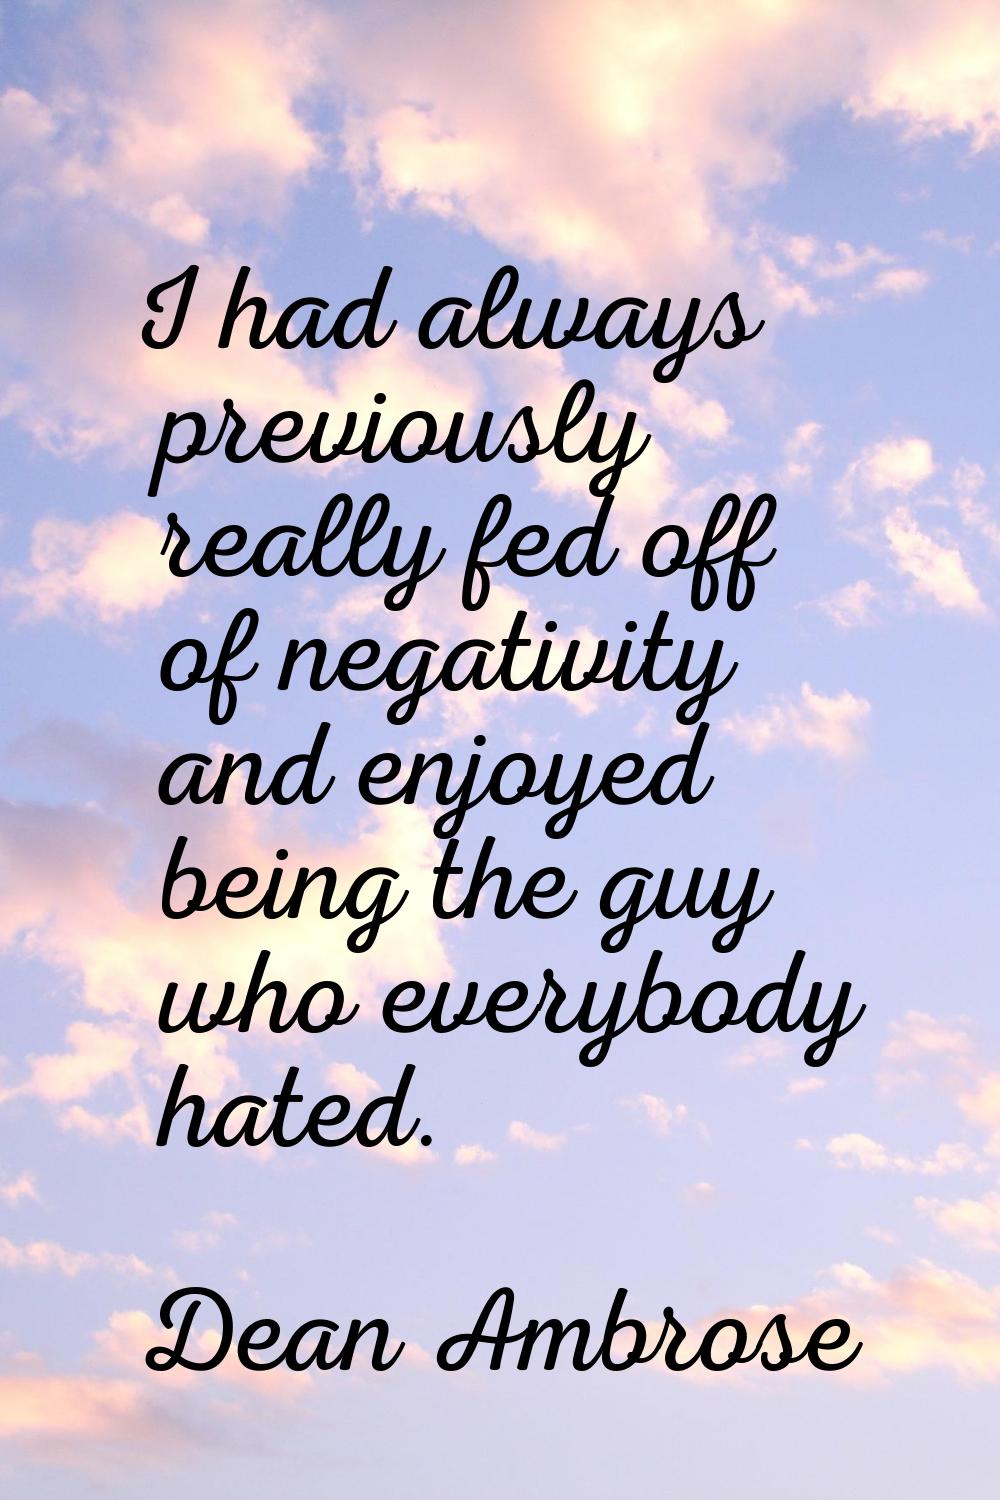 I had always previously really fed off of negativity and enjoyed being the guy who everybody hated.